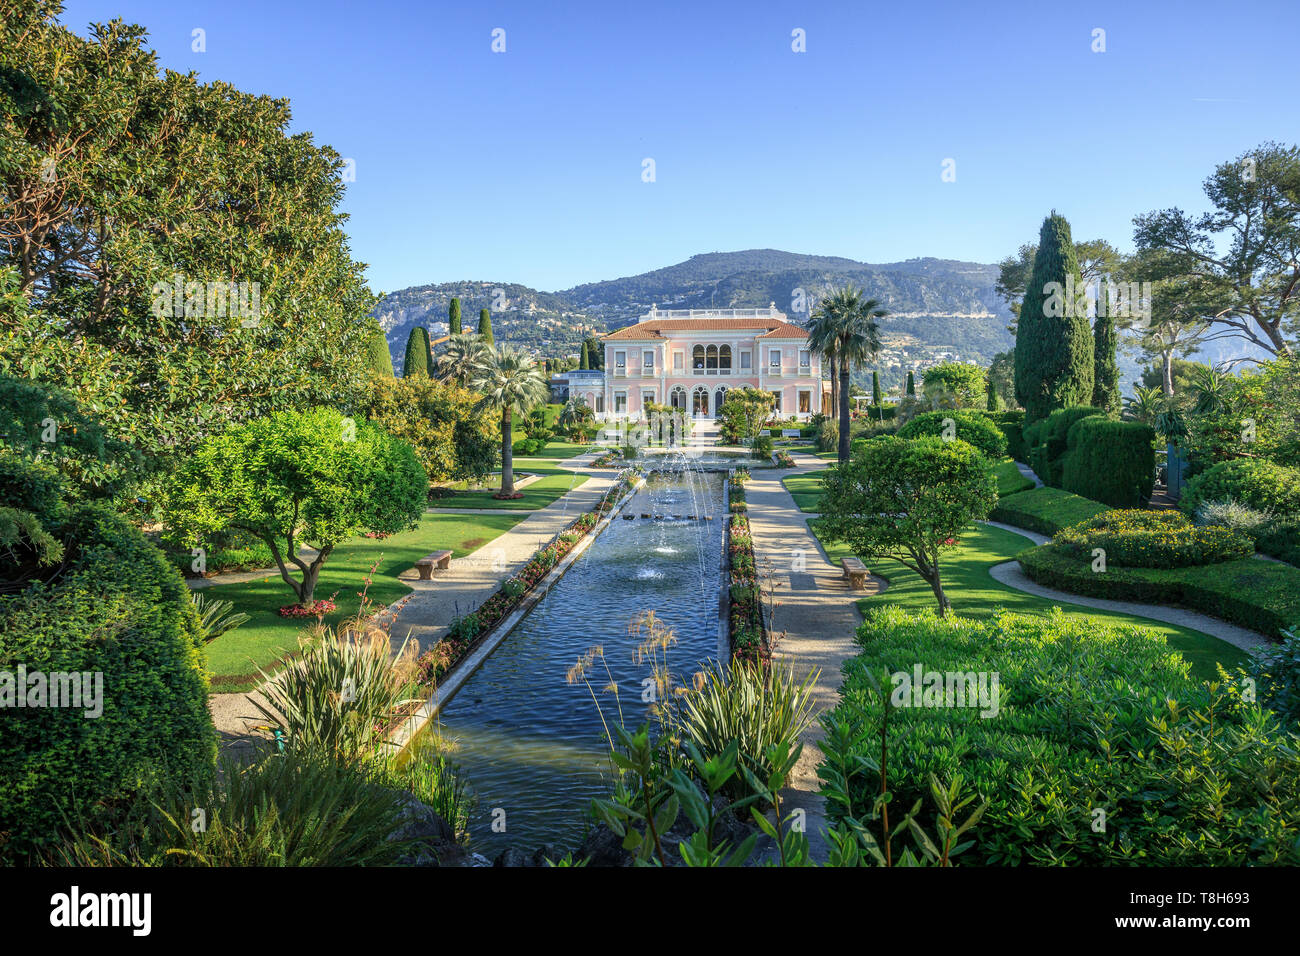 France, Alpes Maritimes, Saint Jean Cap Ferrat, villa and gardens Ephrussi de Rothschild, the French garden, large pond and water jets and view on the Stock Photo